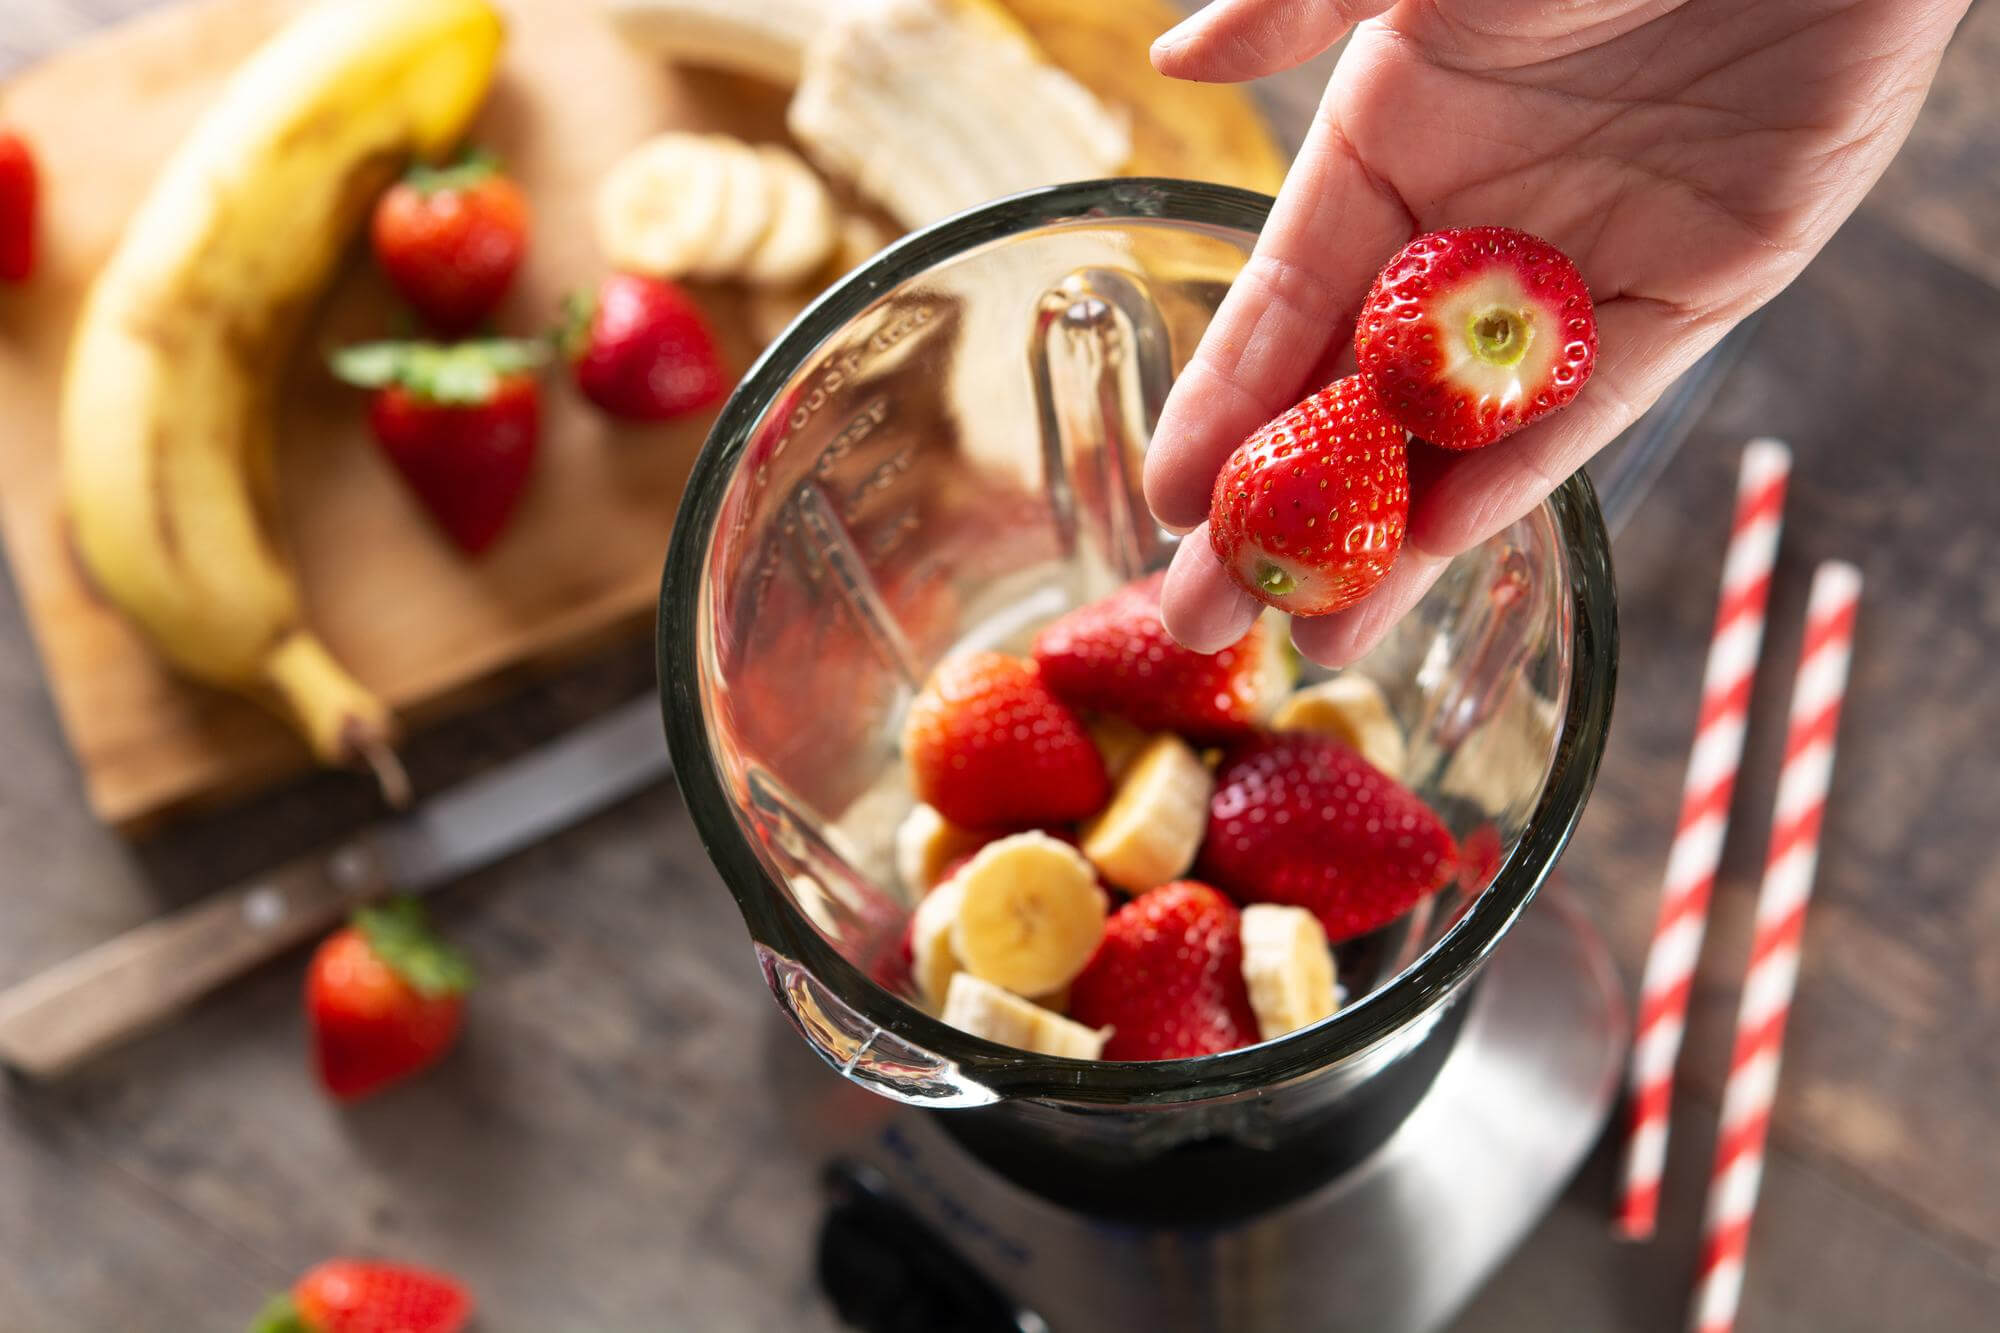 Strawberries and bananas in a blender.